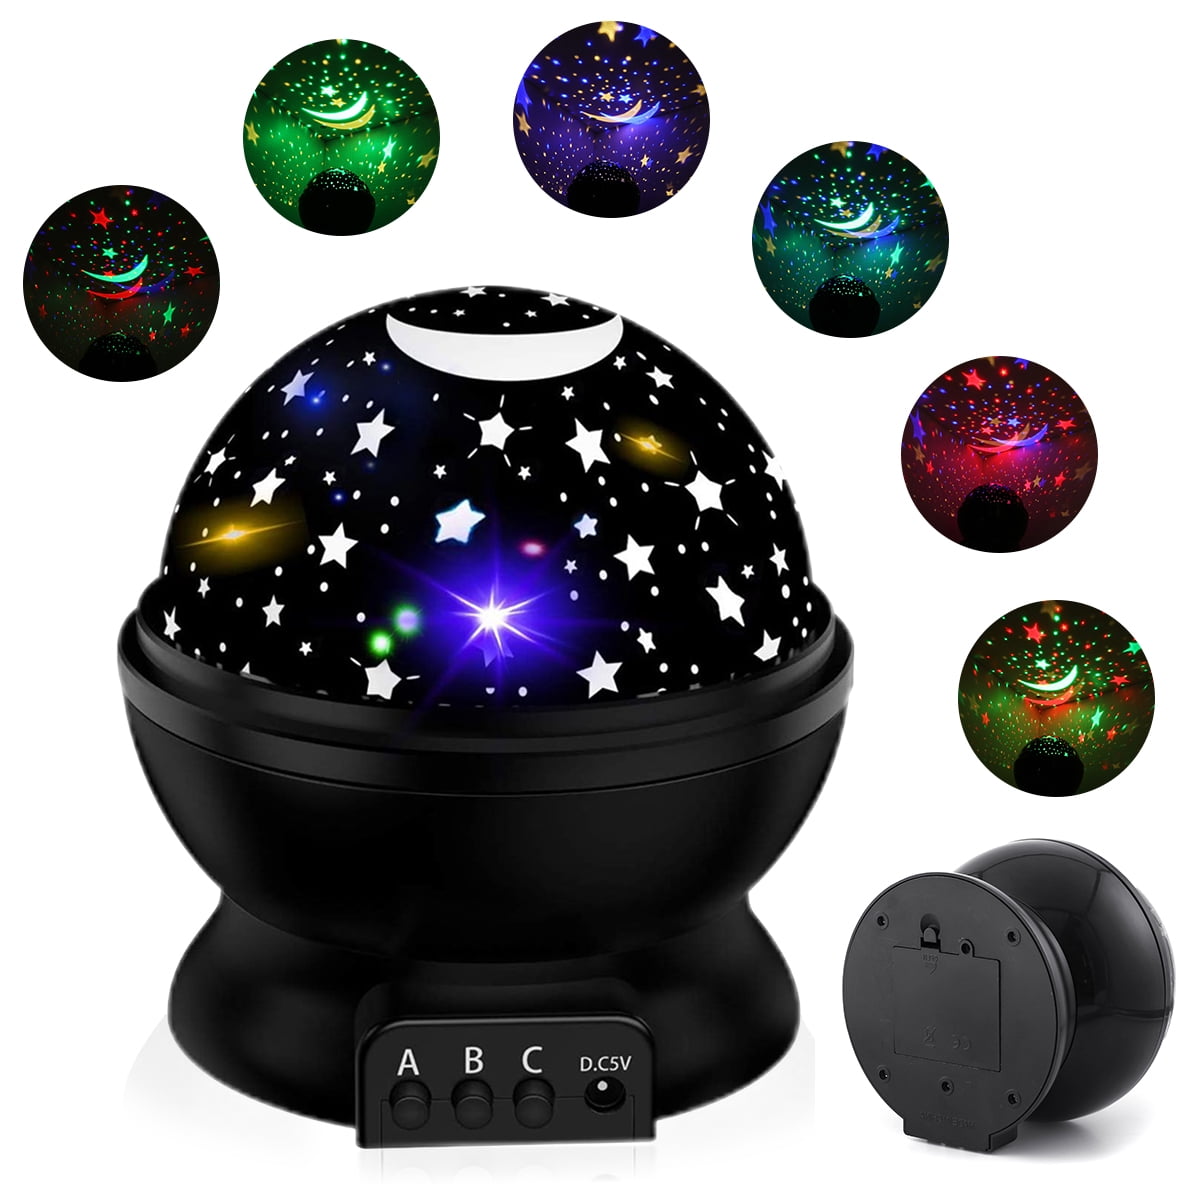 Details about   360°Rotation Colorful LED Galaxy Starry Sky Projector Ocean Wave Room Decor Lamp 